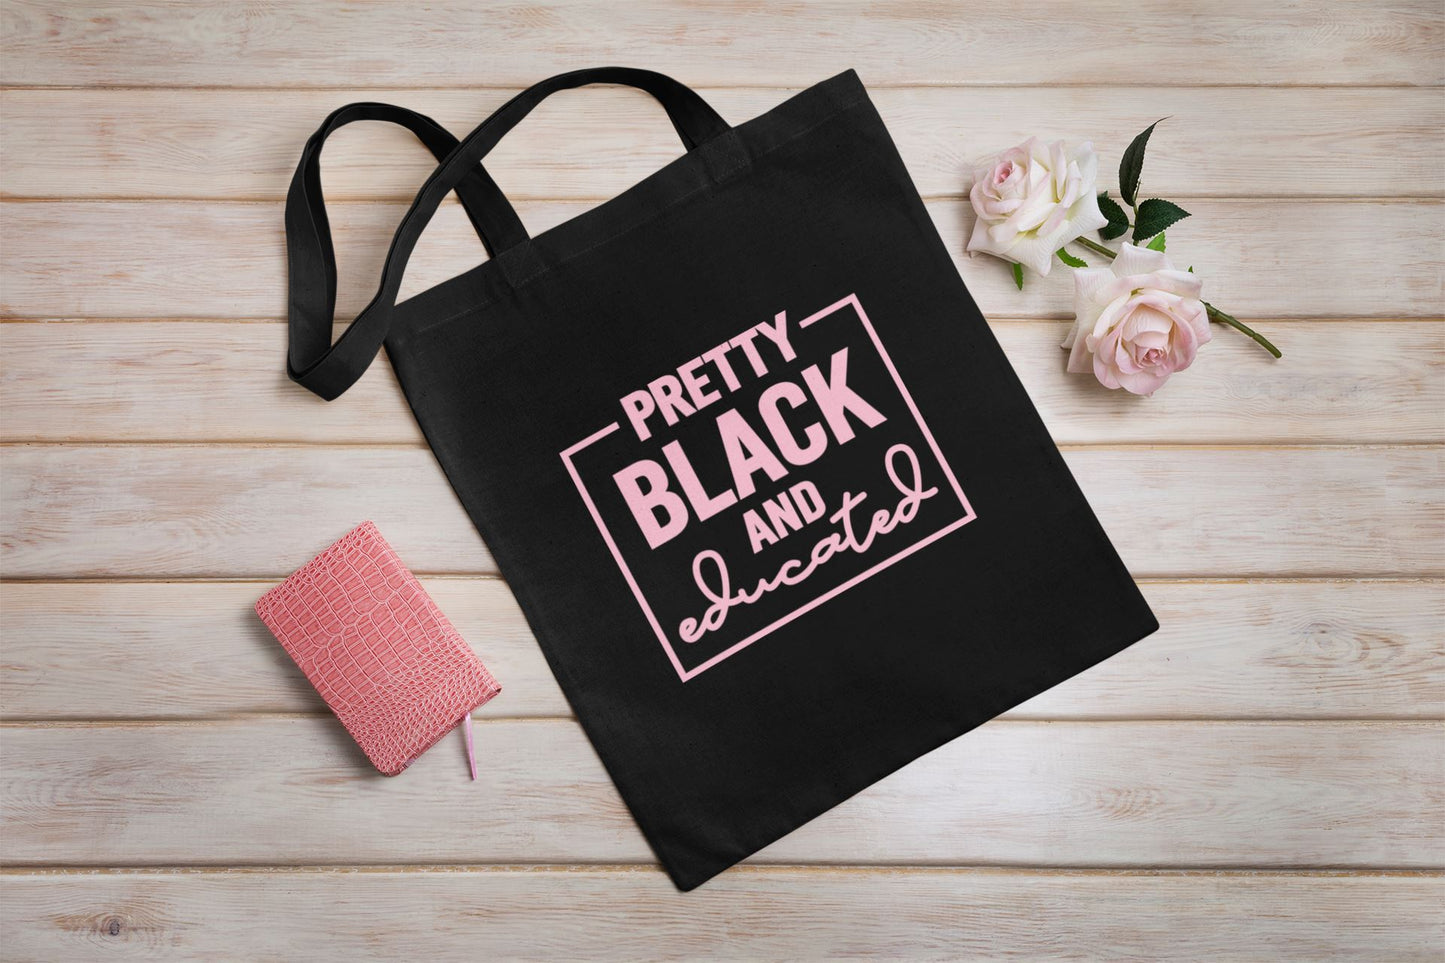 Canvas Tote/Pretty, Black and Educated/Black Queen/Melanin Goddess/Phe –  B1ack By Design LLC